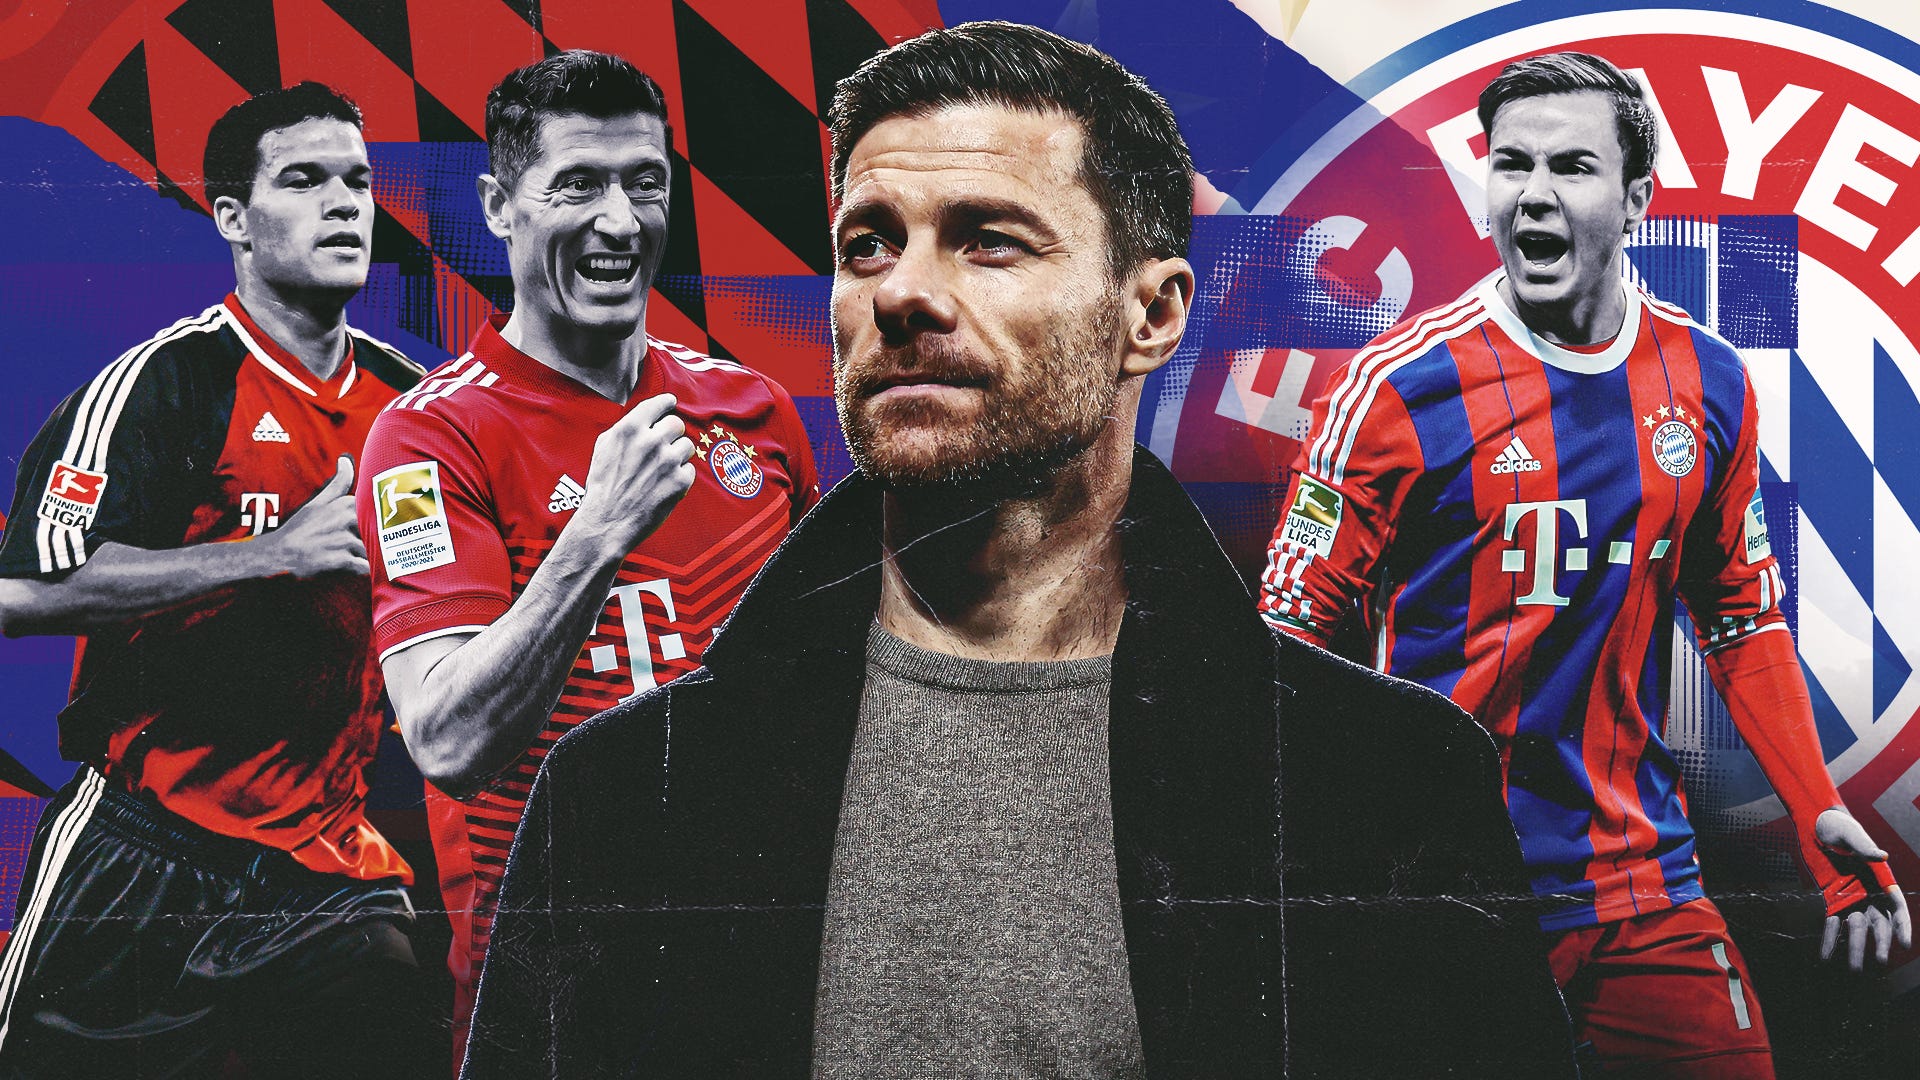 Winning the battle for Xabi Alonso’s services would be Bayern’s ultimate Bundesliga heist